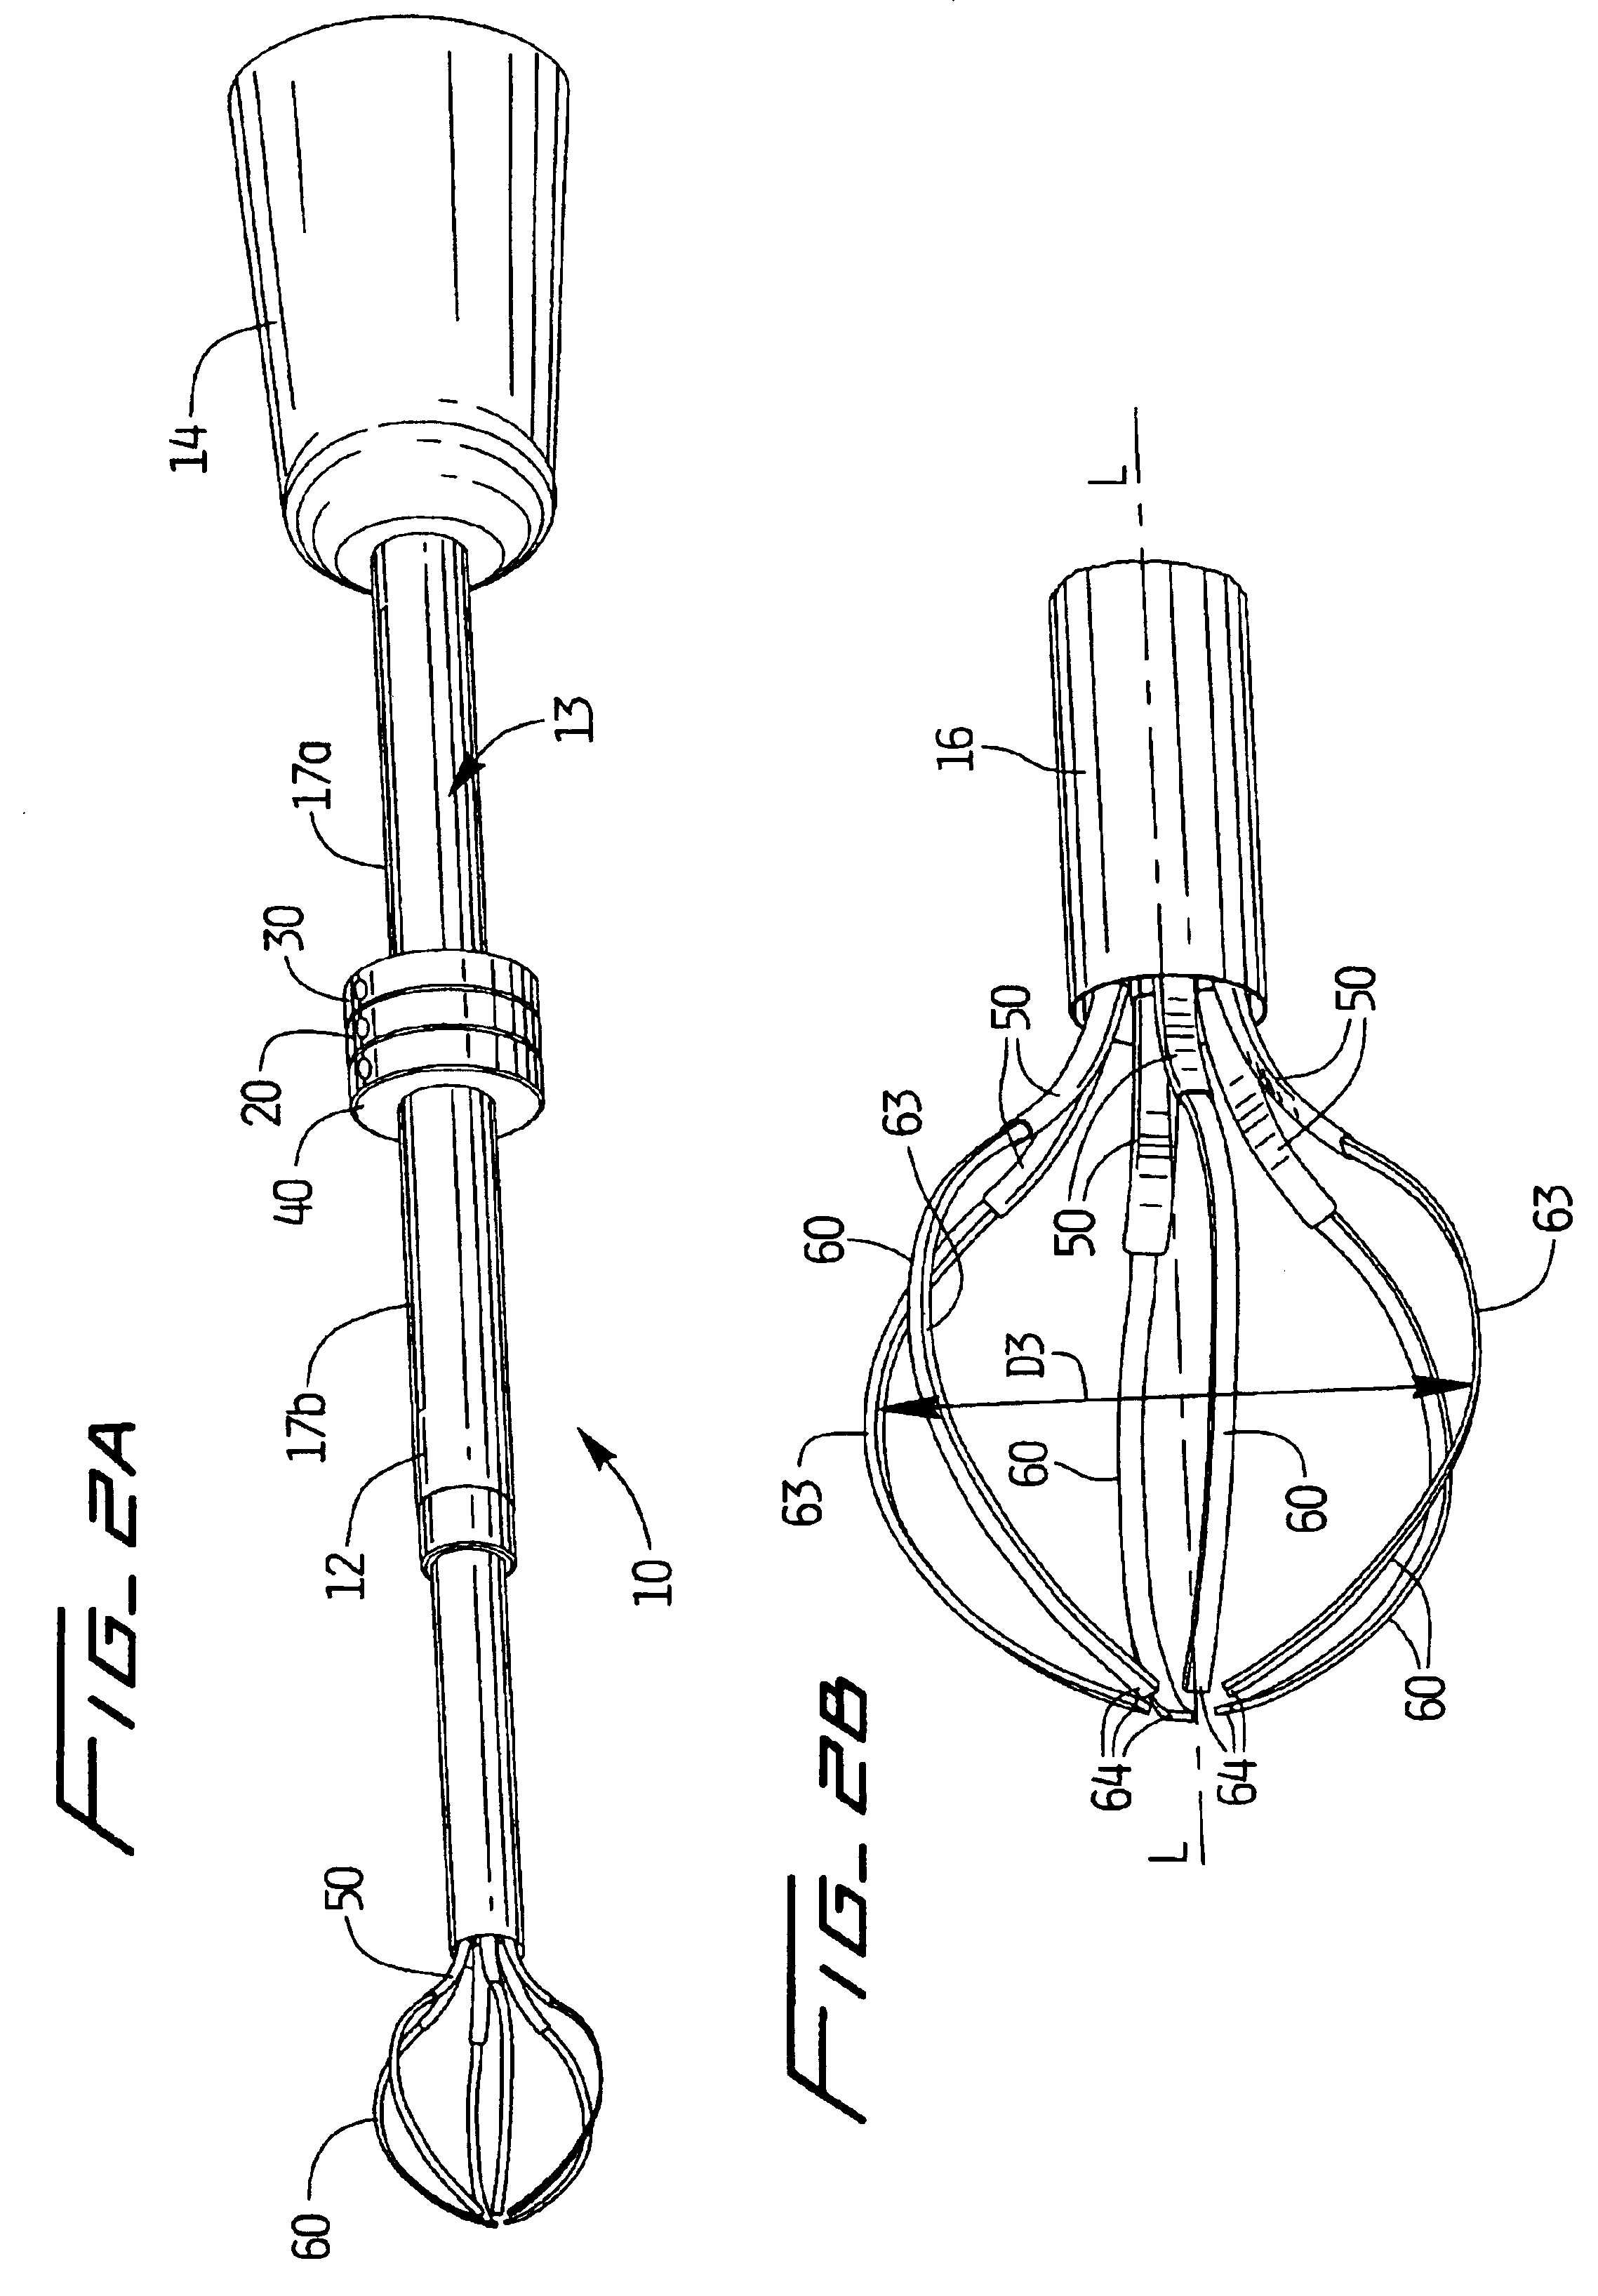 Surgical biopsy device